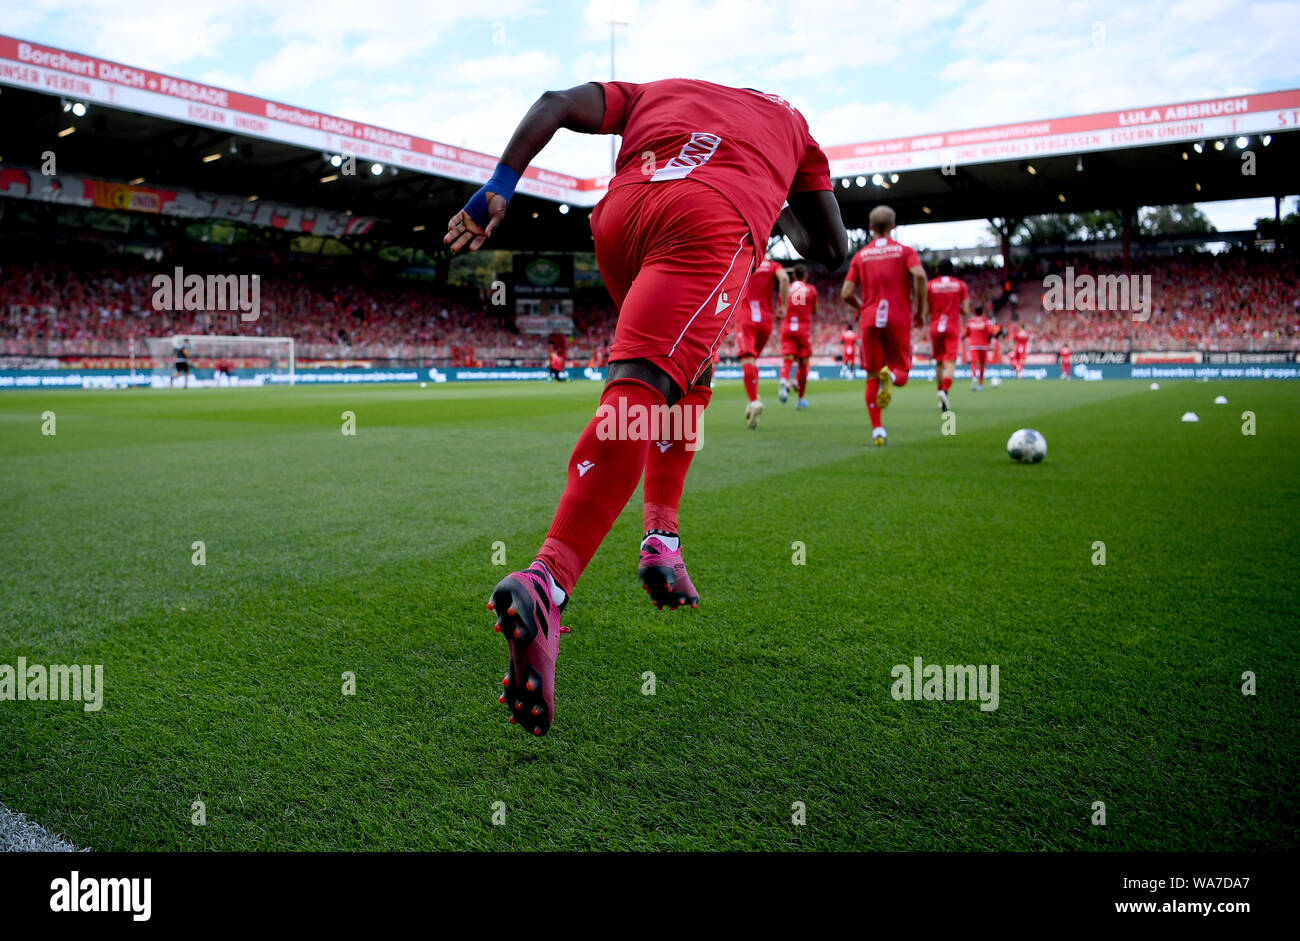 18 August 2019, Berlin: Soccer: Bundesliga, 1st FC Union Berlin - RB Leipzig, 1st matchday in the stadium An der Alten Försterei. Union Anthony Ujah warms up before the game starts. Photo: Britta Pedersen/dpa-Zentralbild/dpa - IMPORTANT NOTE: In accordance with the requirements of the DFL Deutsche Fußball Liga or the DFB Deutscher Fußball-Bund, it is prohibited to use or have used photographs taken in the stadium and/or the match in the form of sequence images and/or video-like photo sequences. Stock Photo